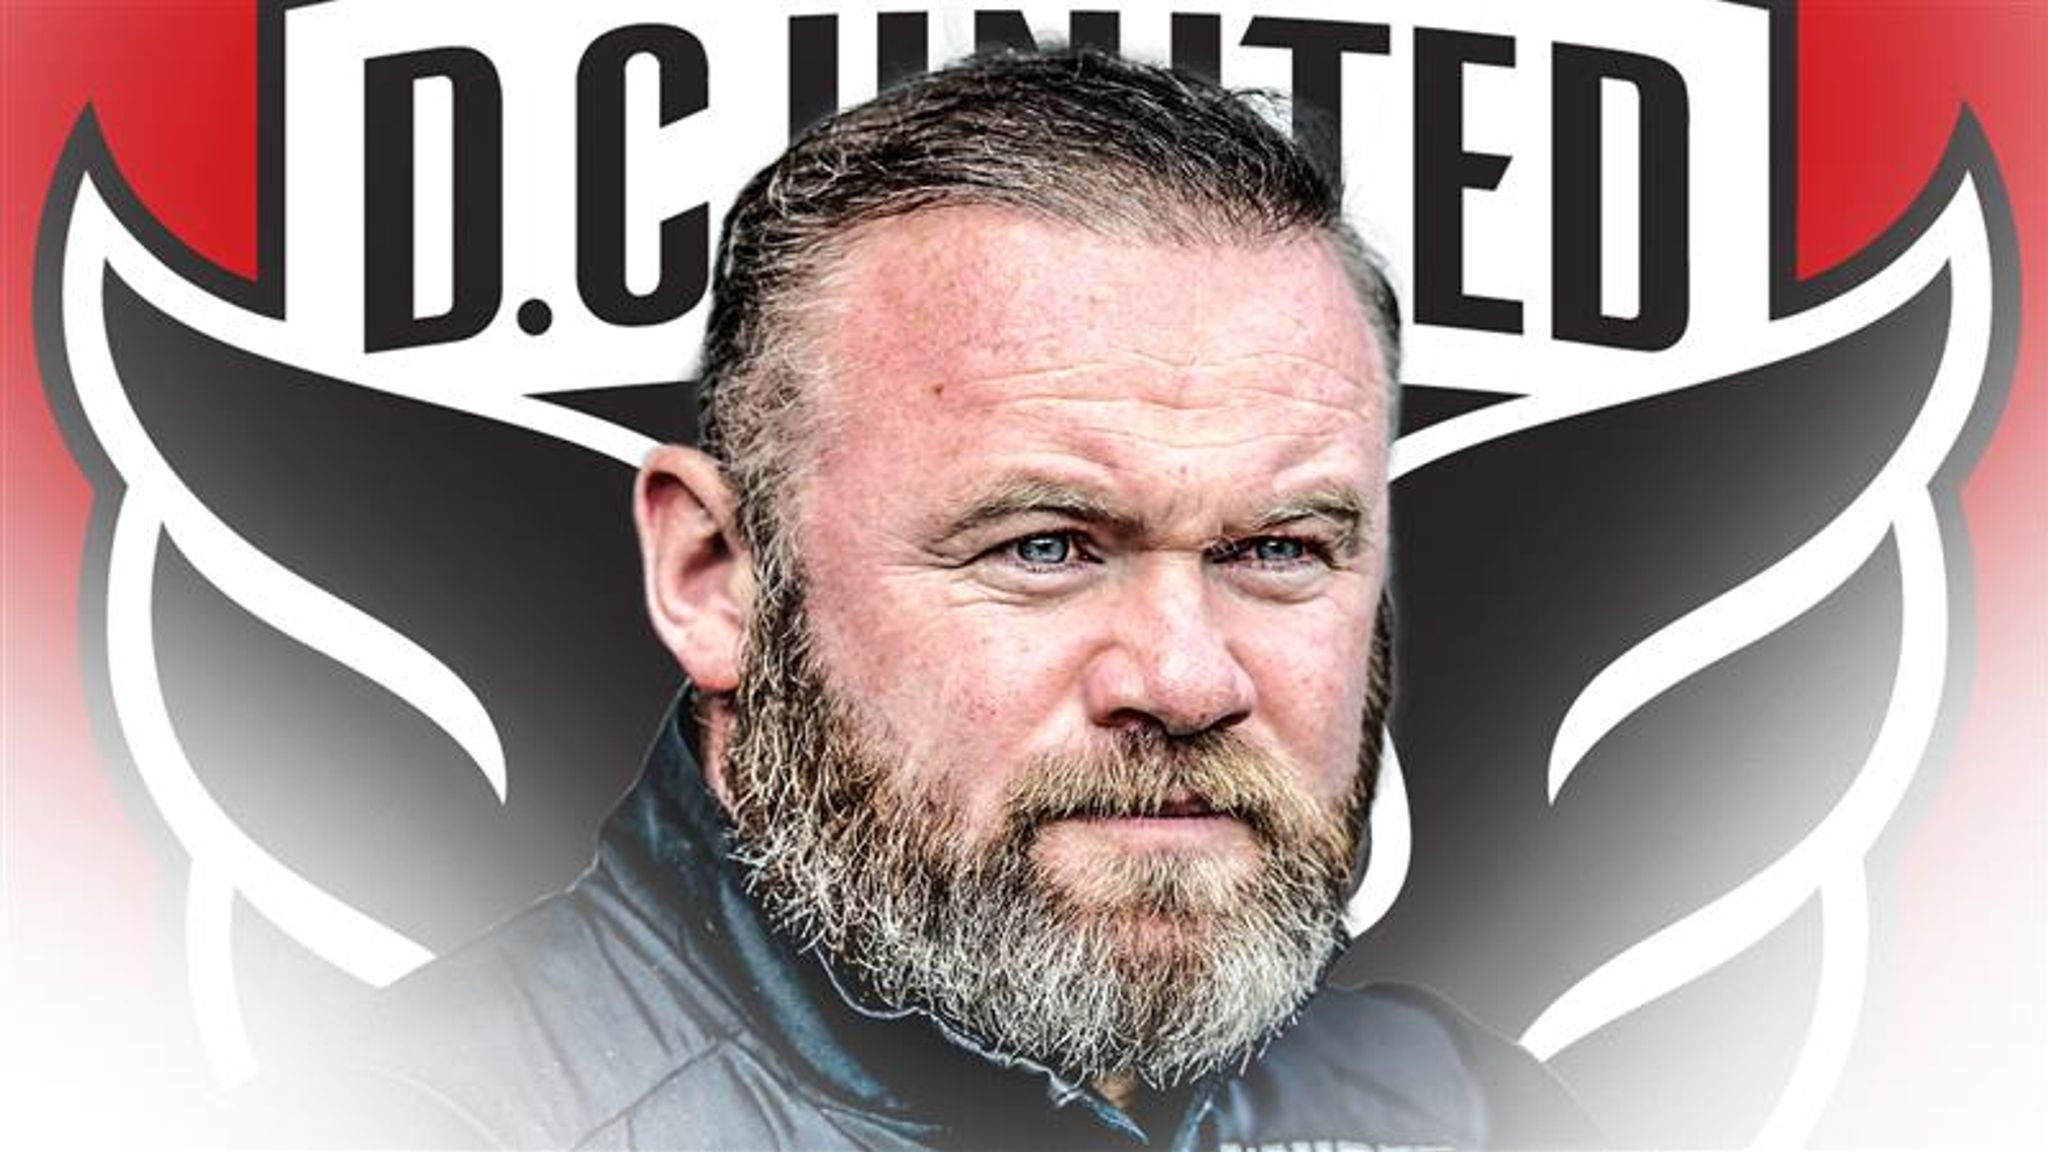 Wayne Rooney becomes DC United's head coach despite his wife's disapproval over move to USA